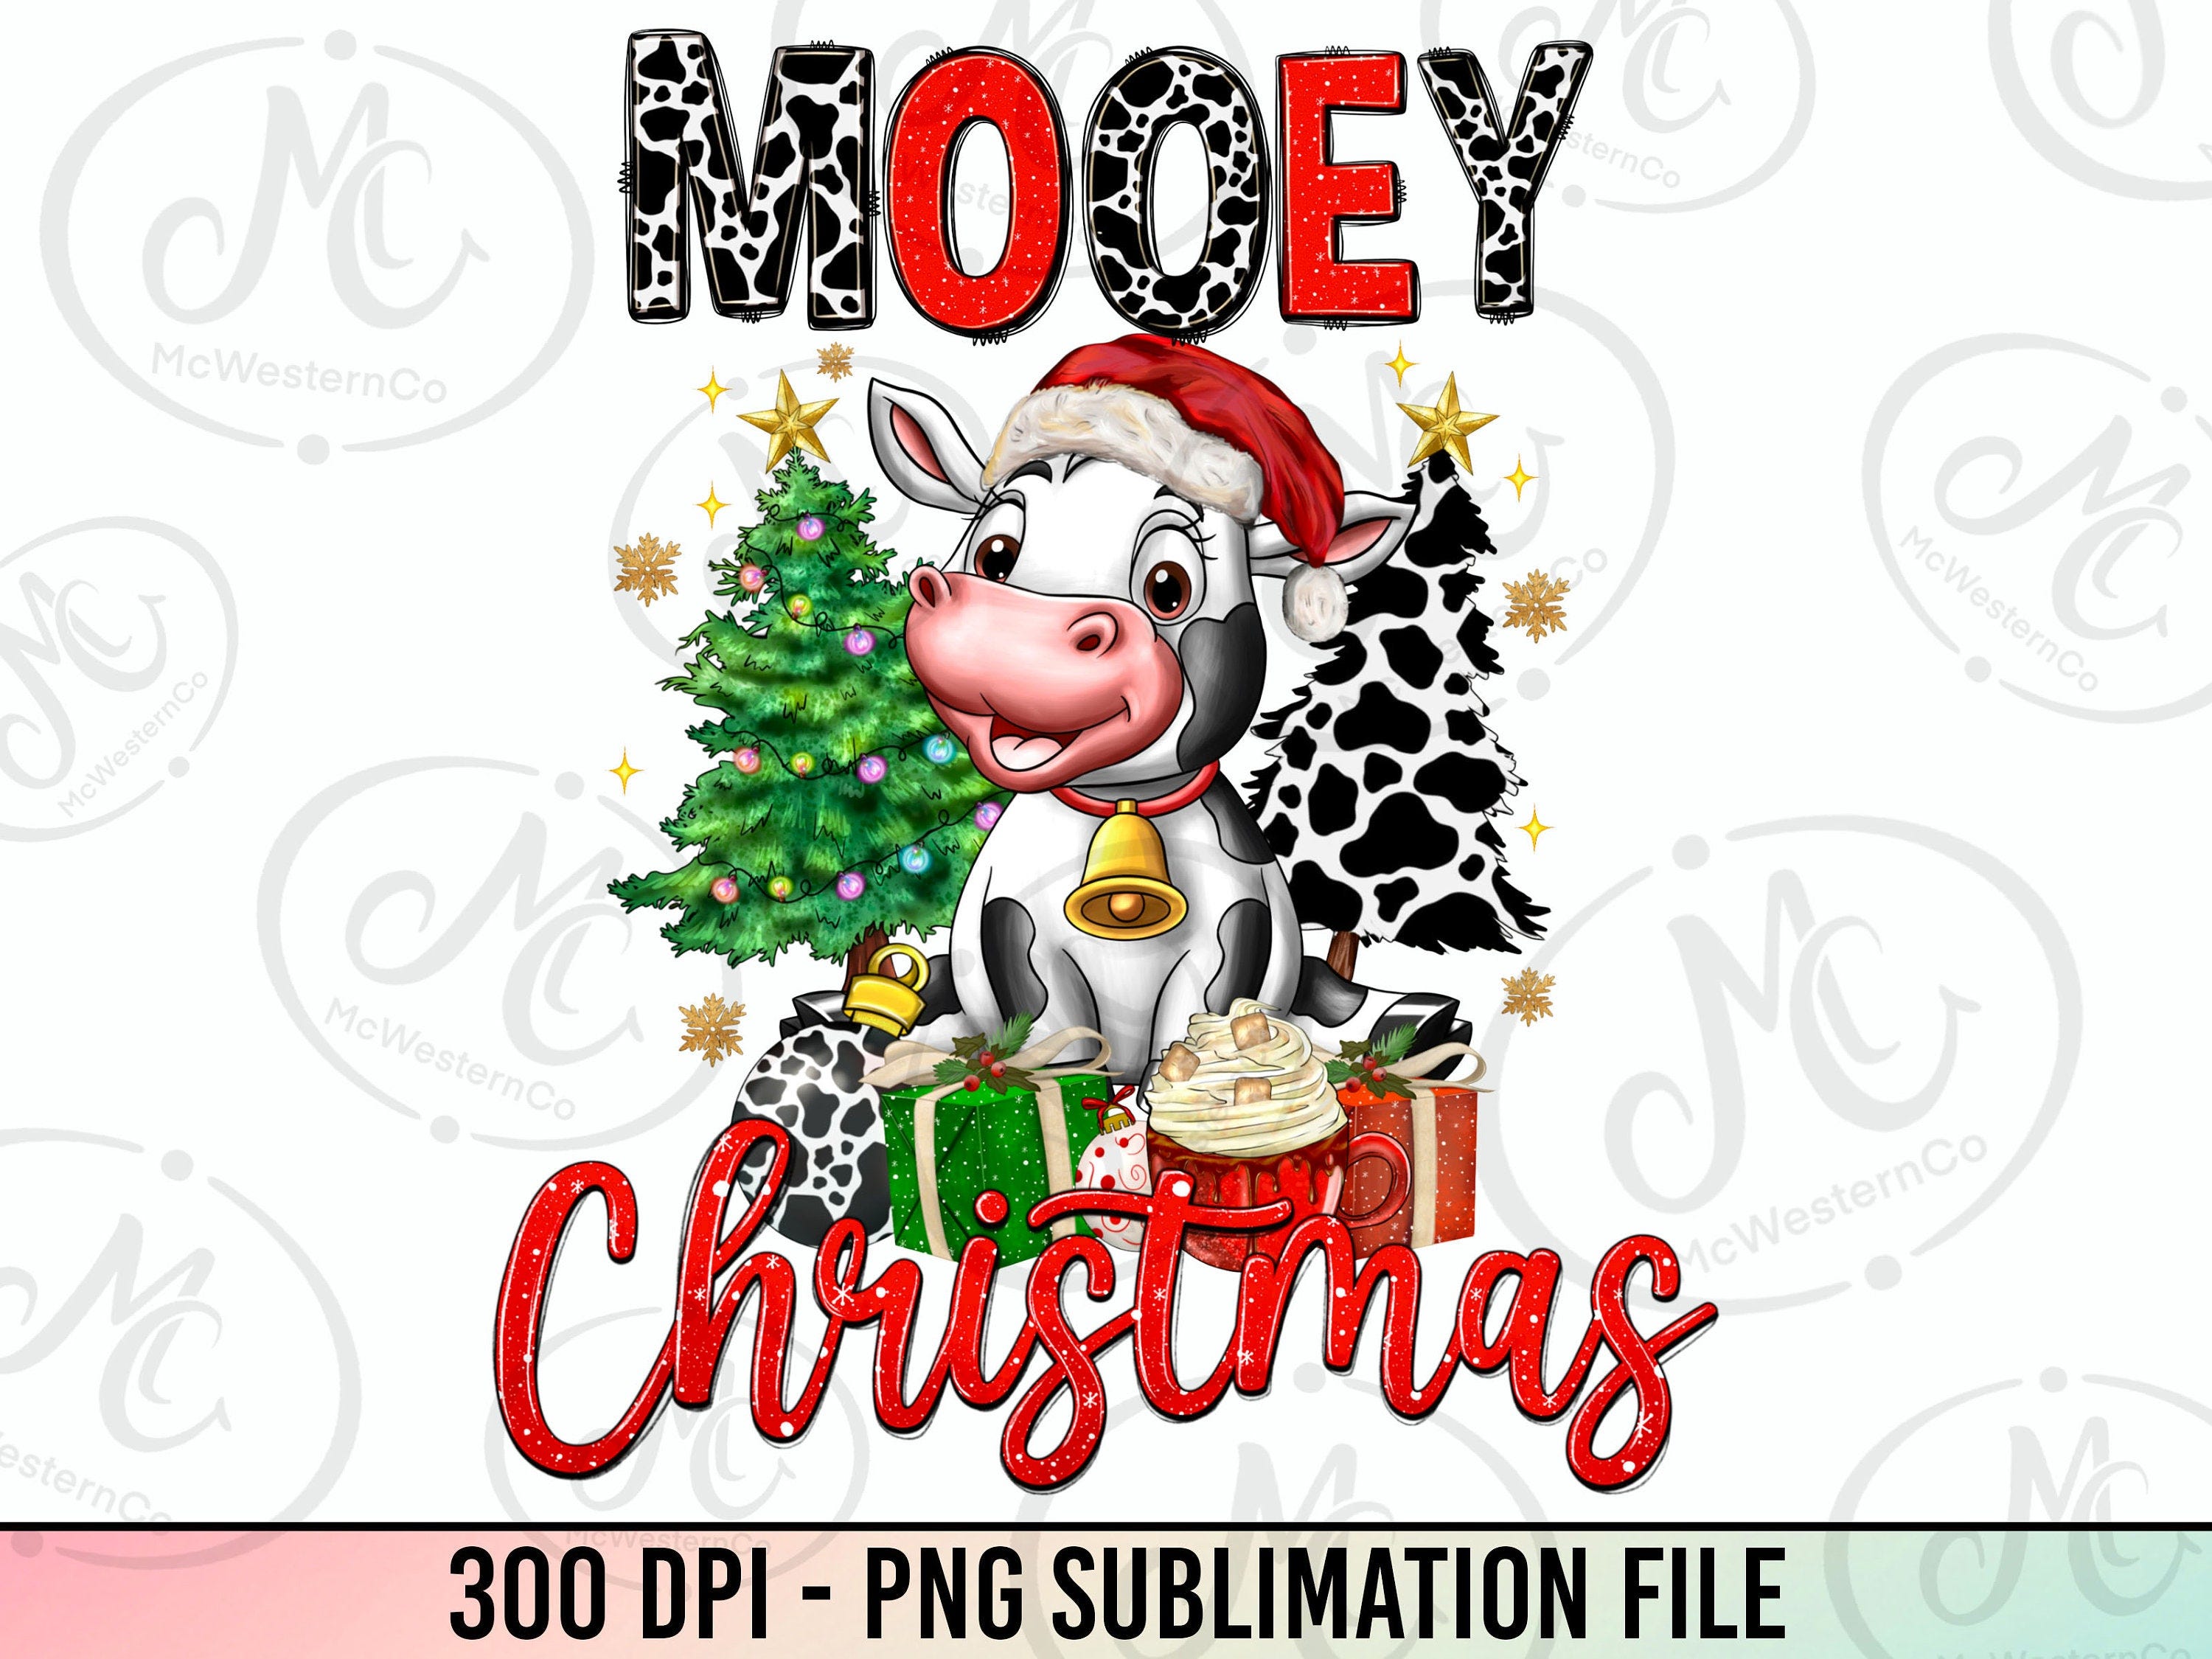 Mooey Christmas cow png sublimation design download, Merry Christmas png, Happy New Year png, Christmas cow png, sublimate designs download